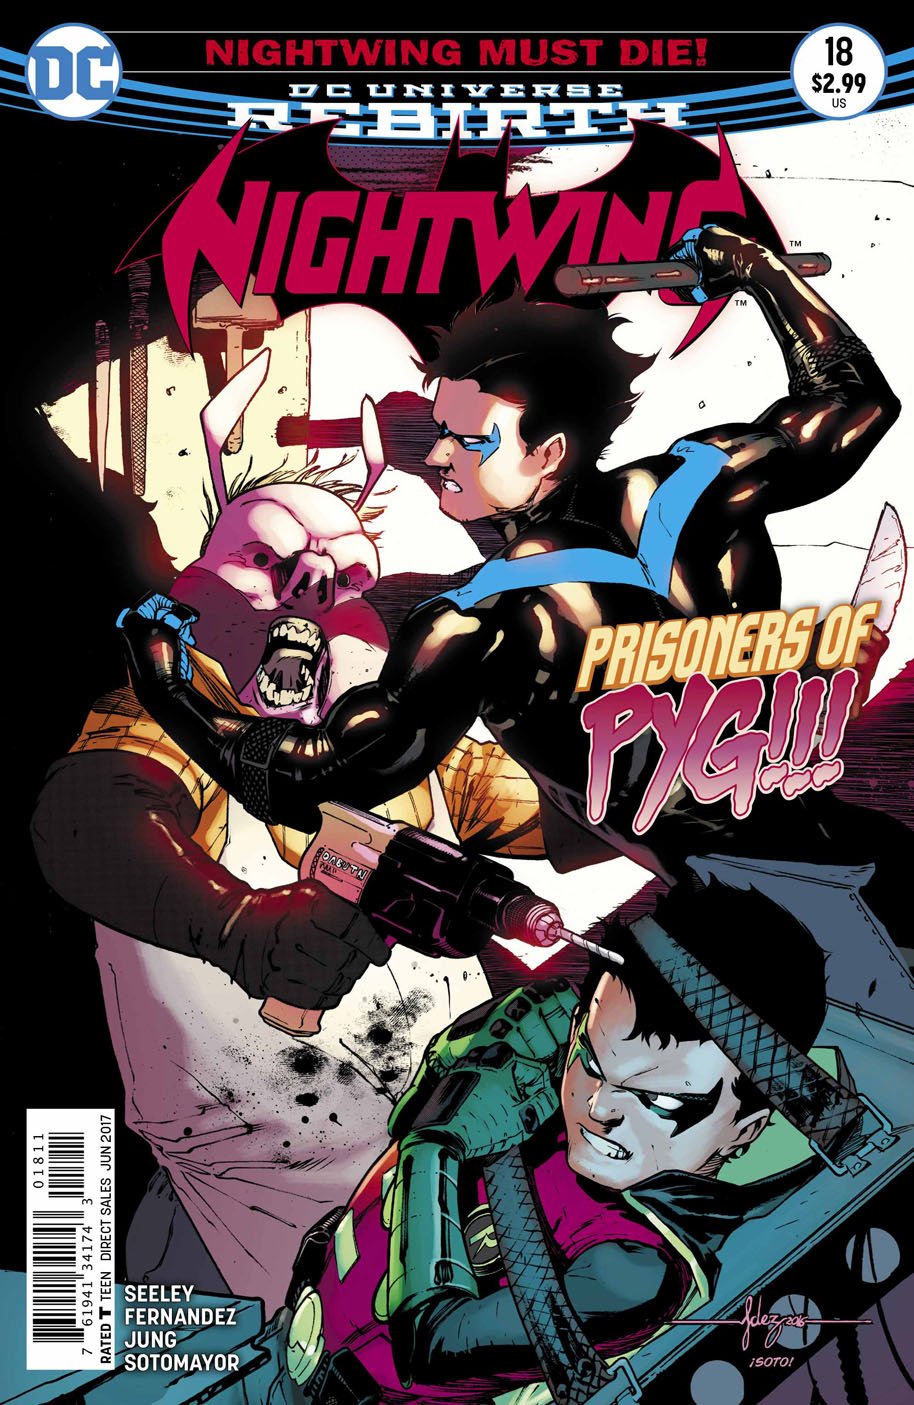 Nightwing #18 Review